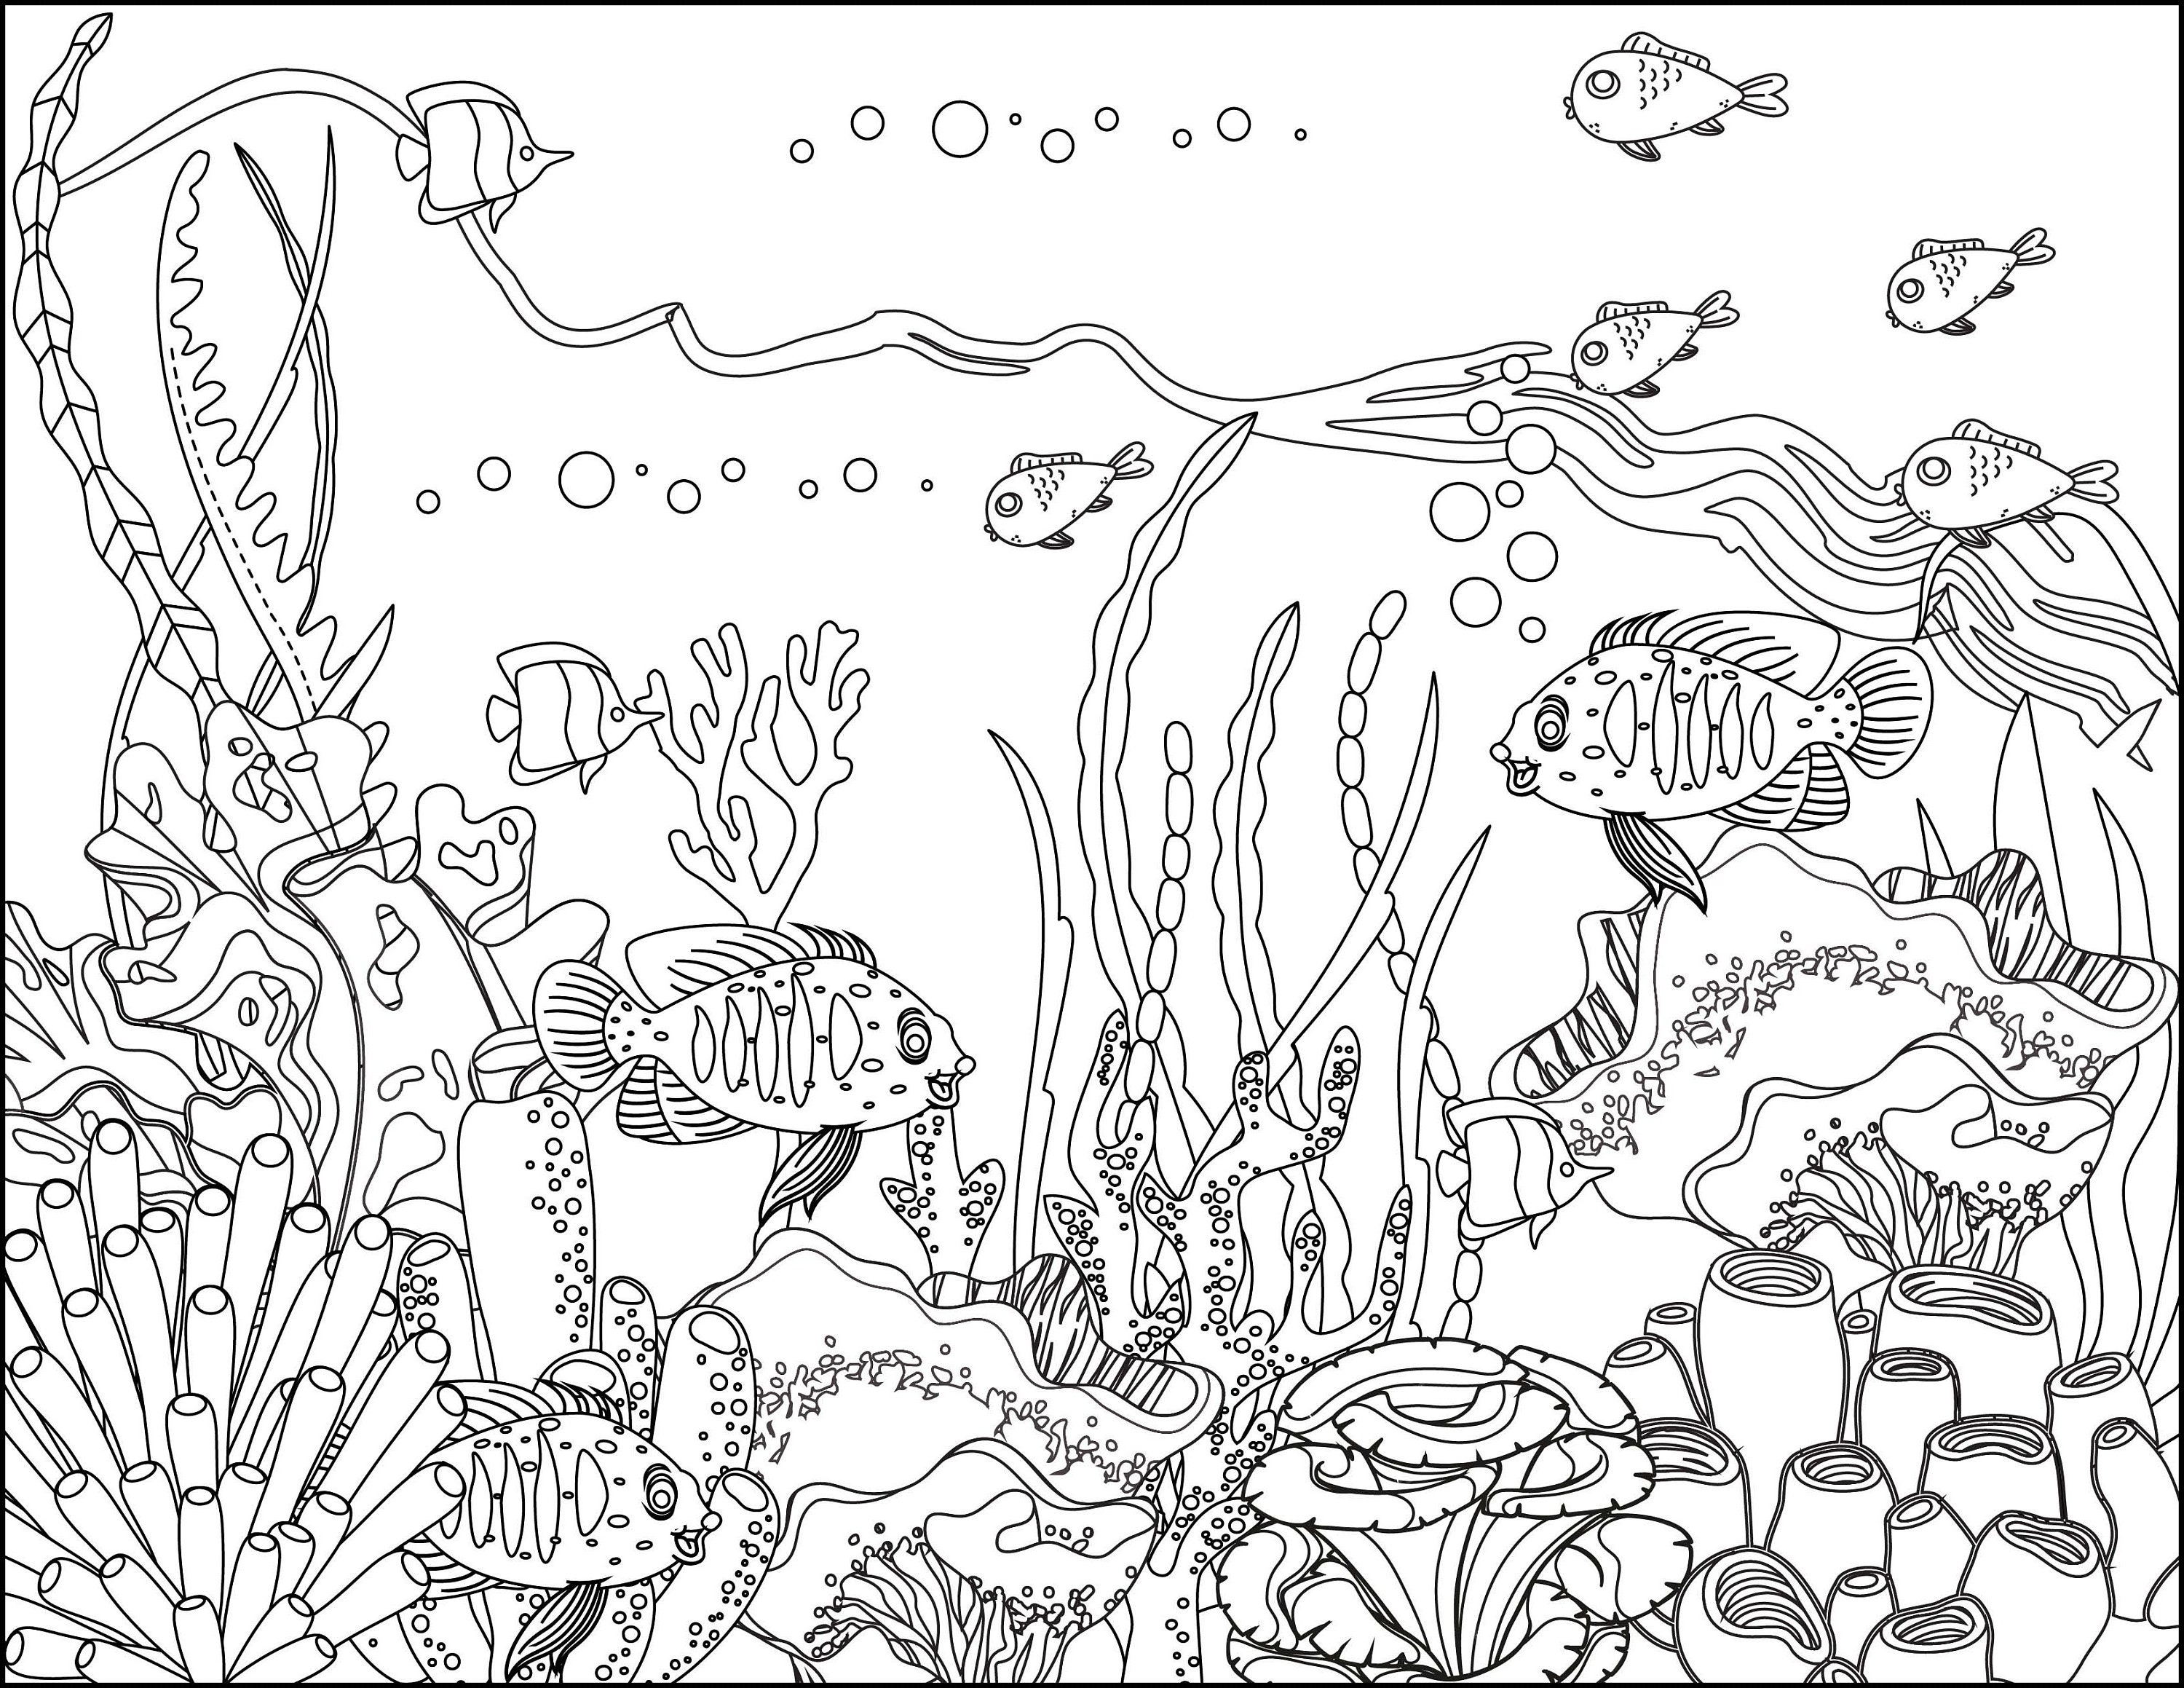 Under the Sea Coloring Pad, 9 in. x 12 in. by Horizon Group USA